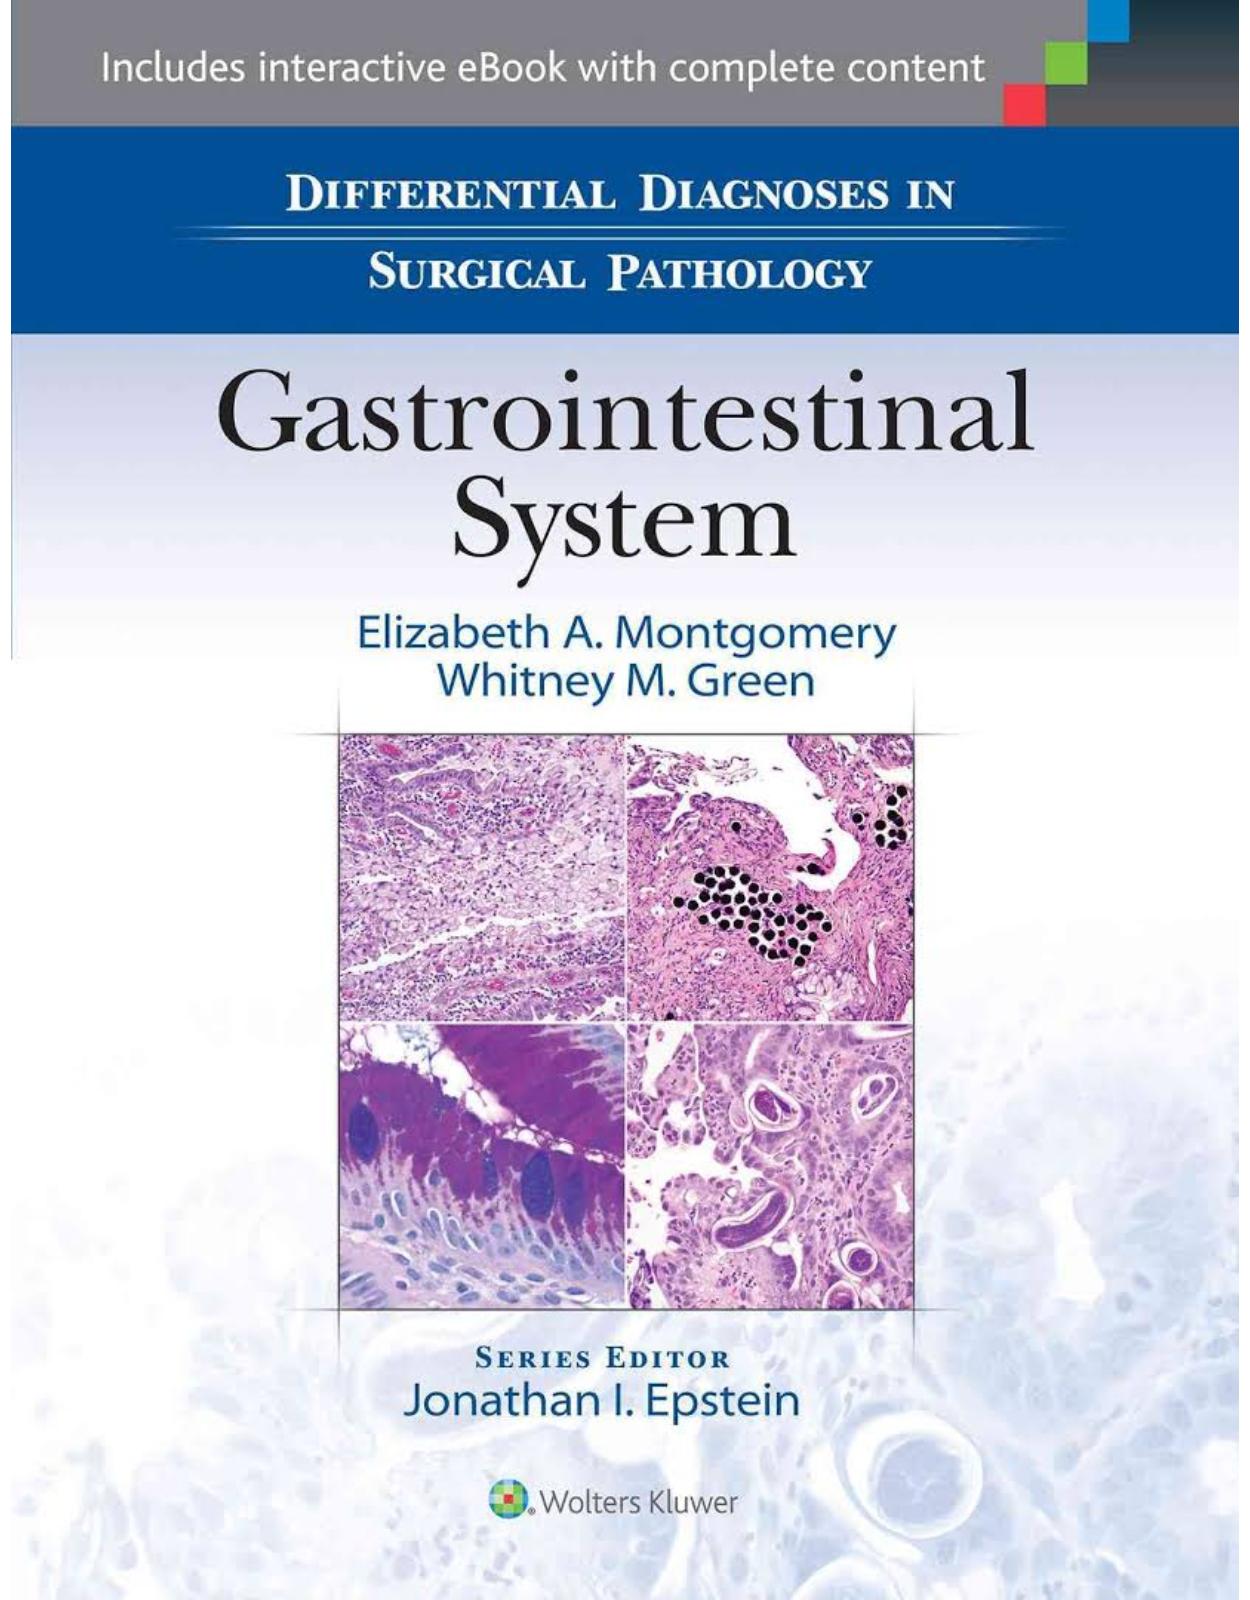 Differential Diagnoses in Surgical Pathology: Gastrointestinal System 